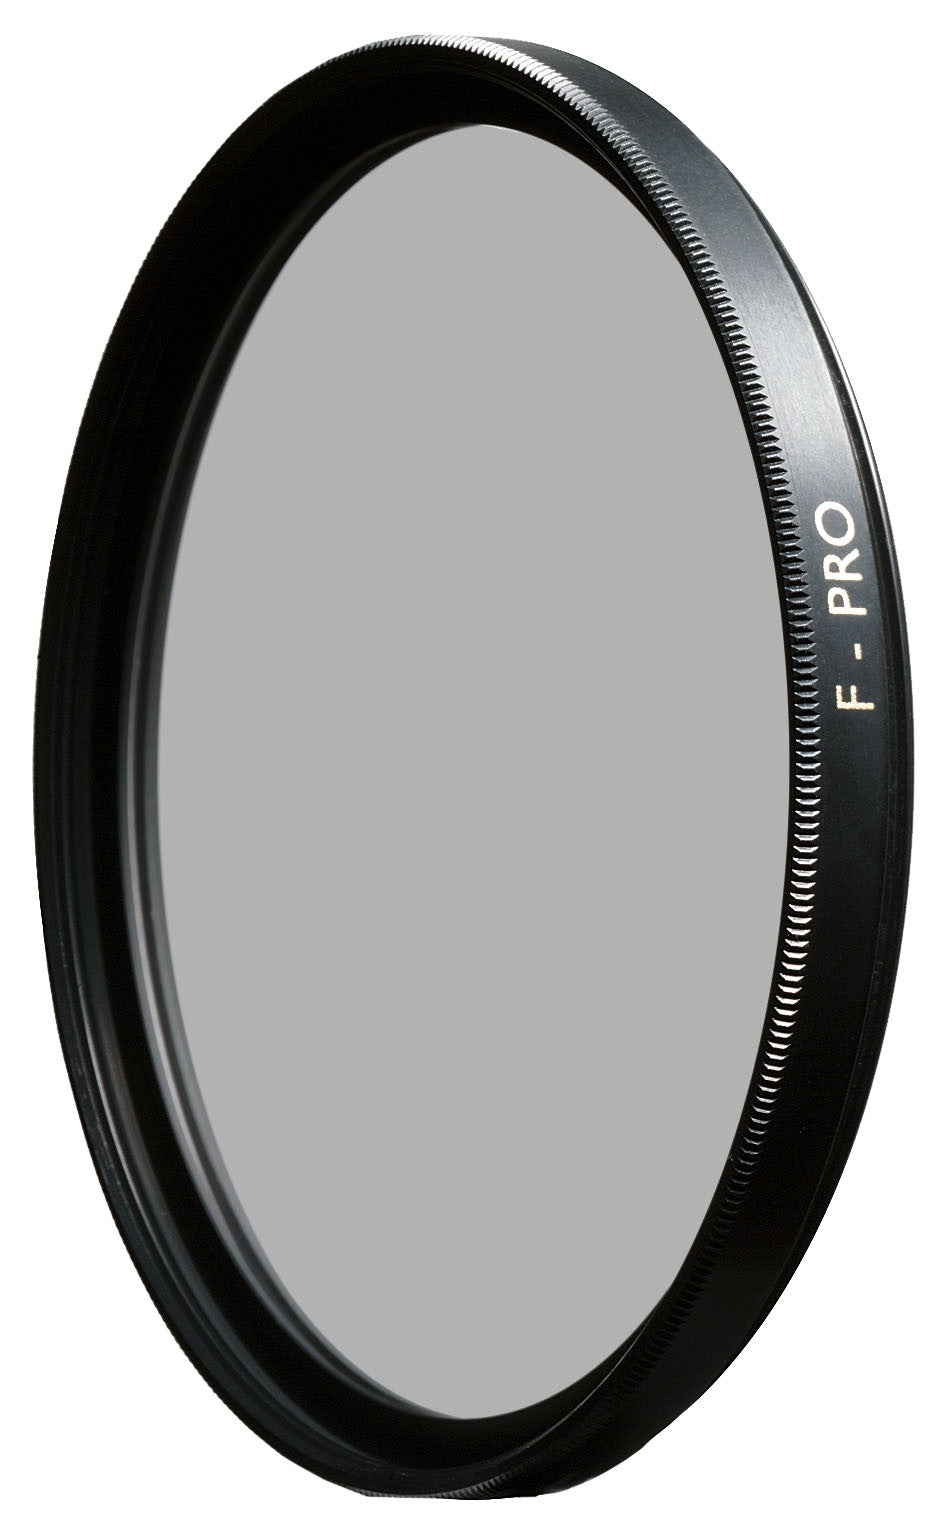 B+W 77mm 0.6 Neutral Density  Filter #102, lenses filters nd, B+W - Pictureline 